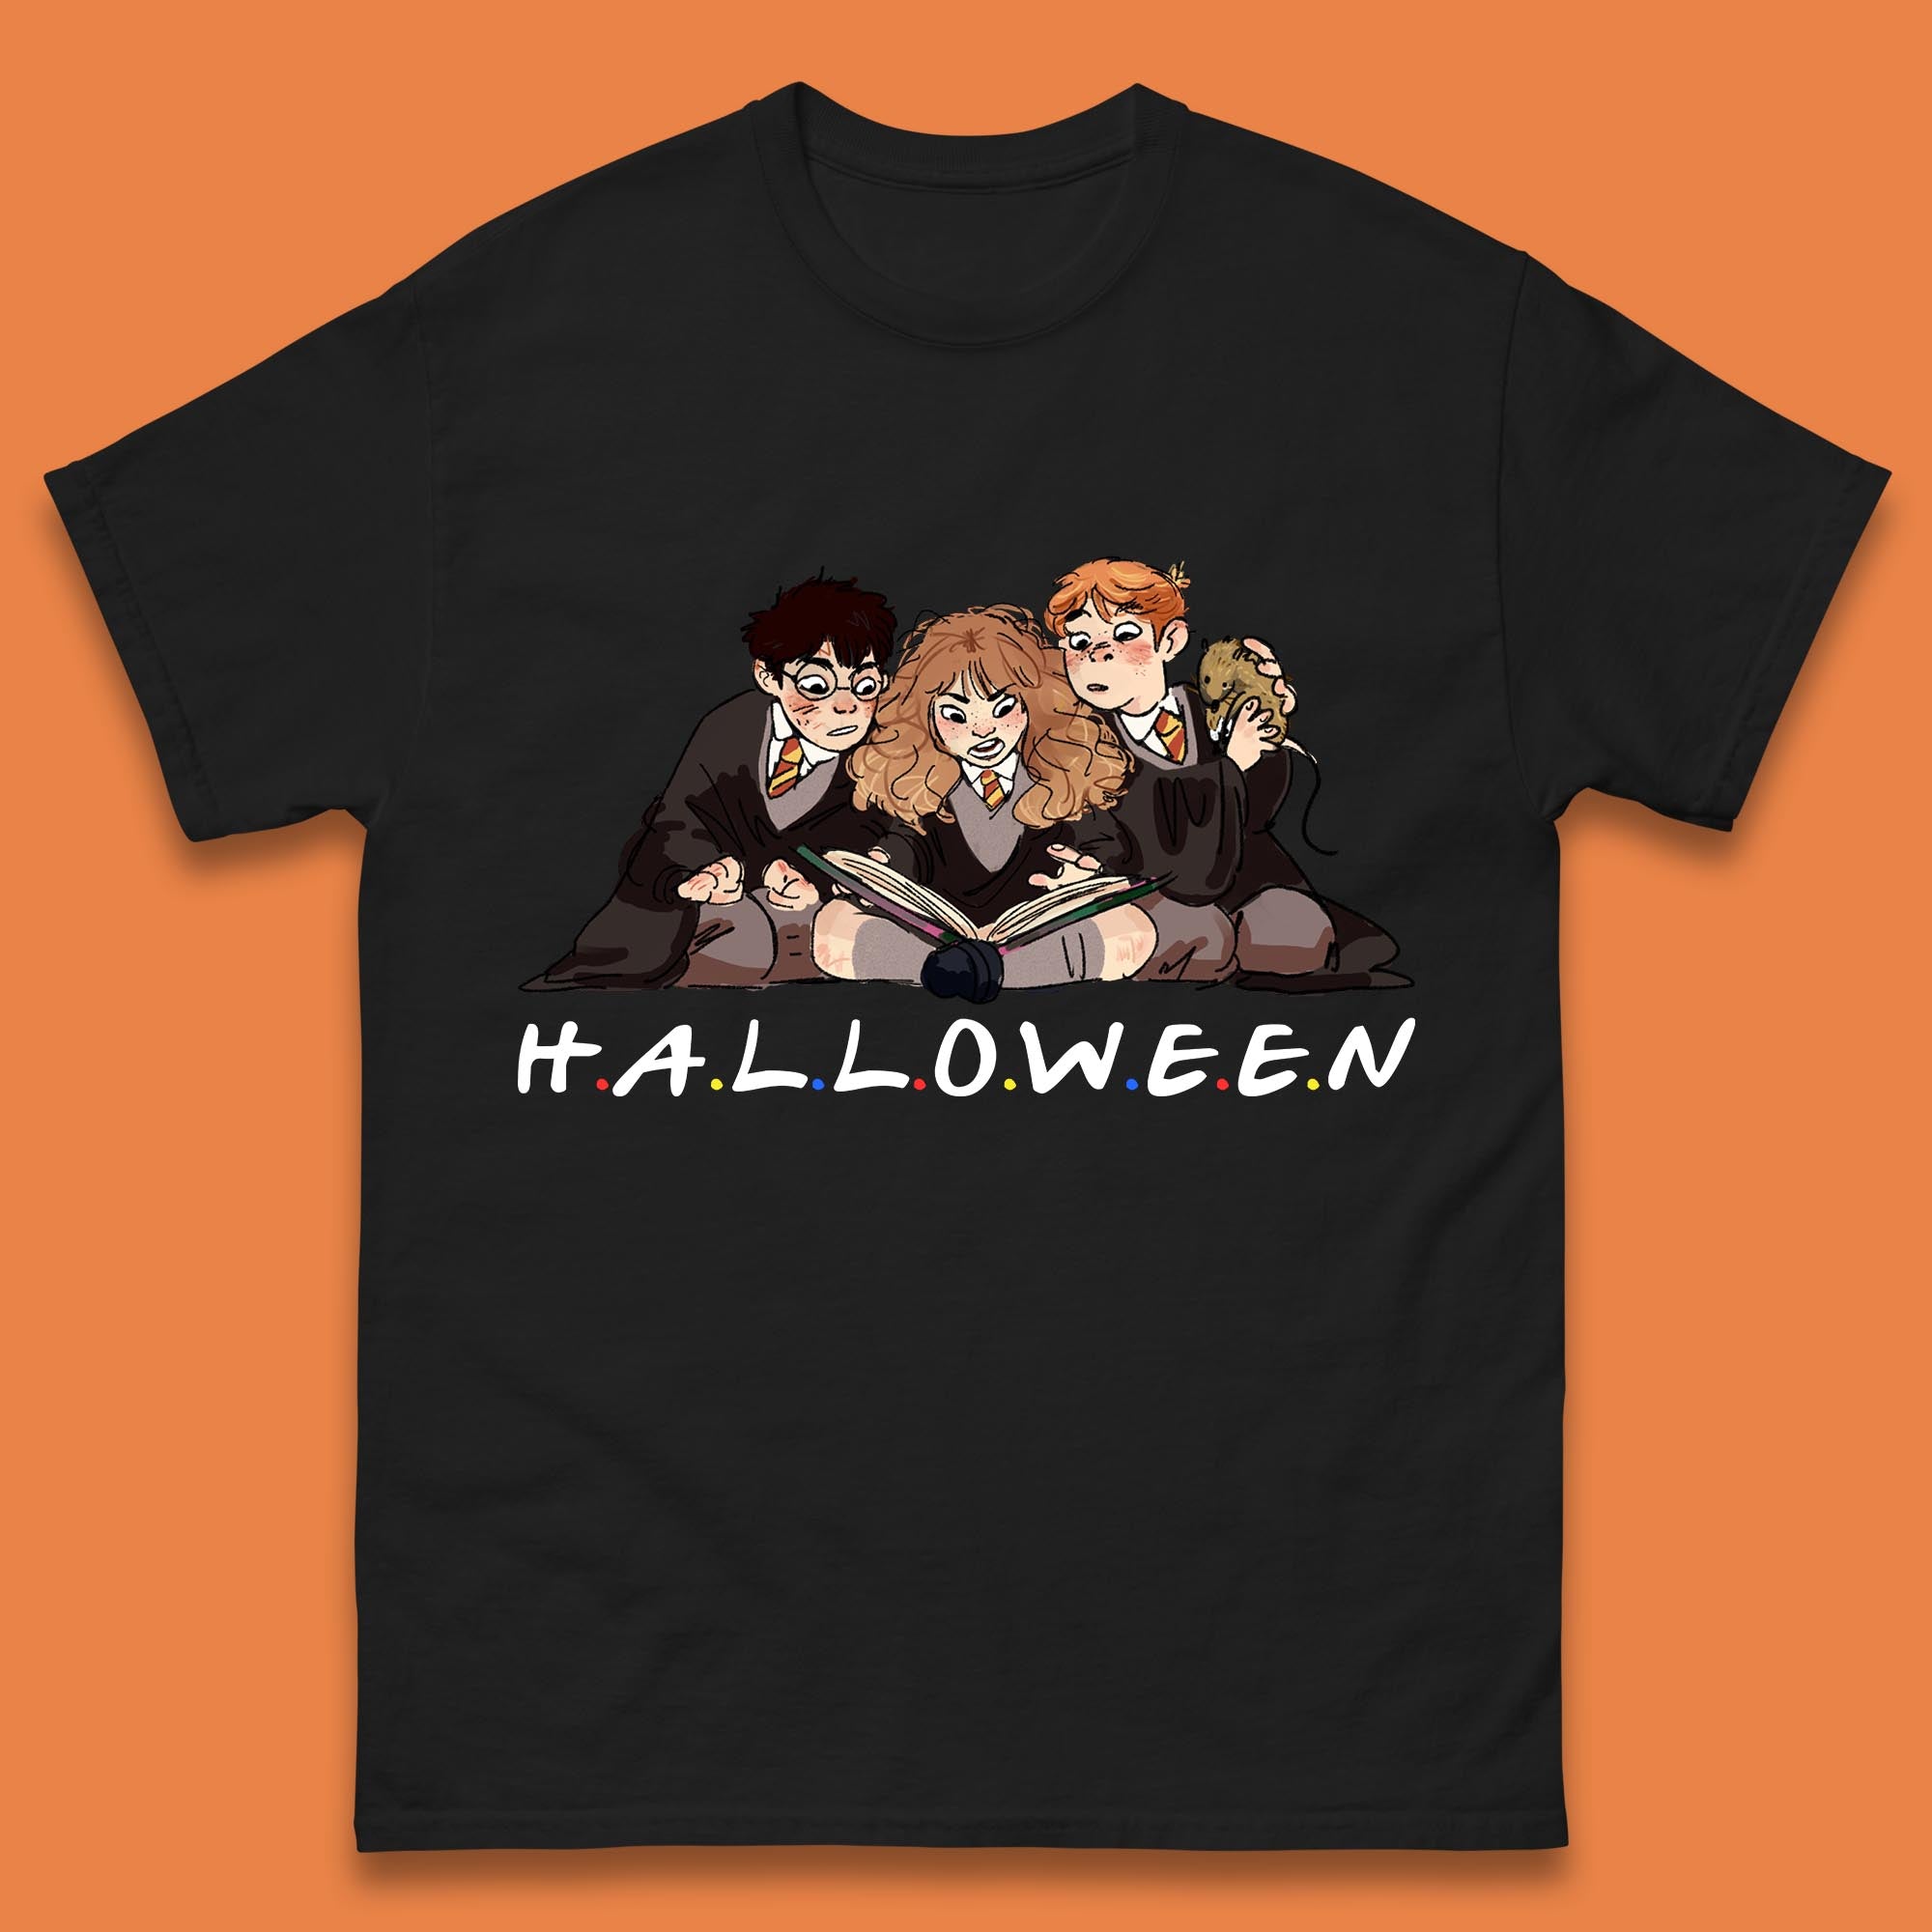 Halloween Harry Potter Series Character Harry, Ron and Hermione Friends Movie Spoof Fantasy Novels Film Mens Tee Top